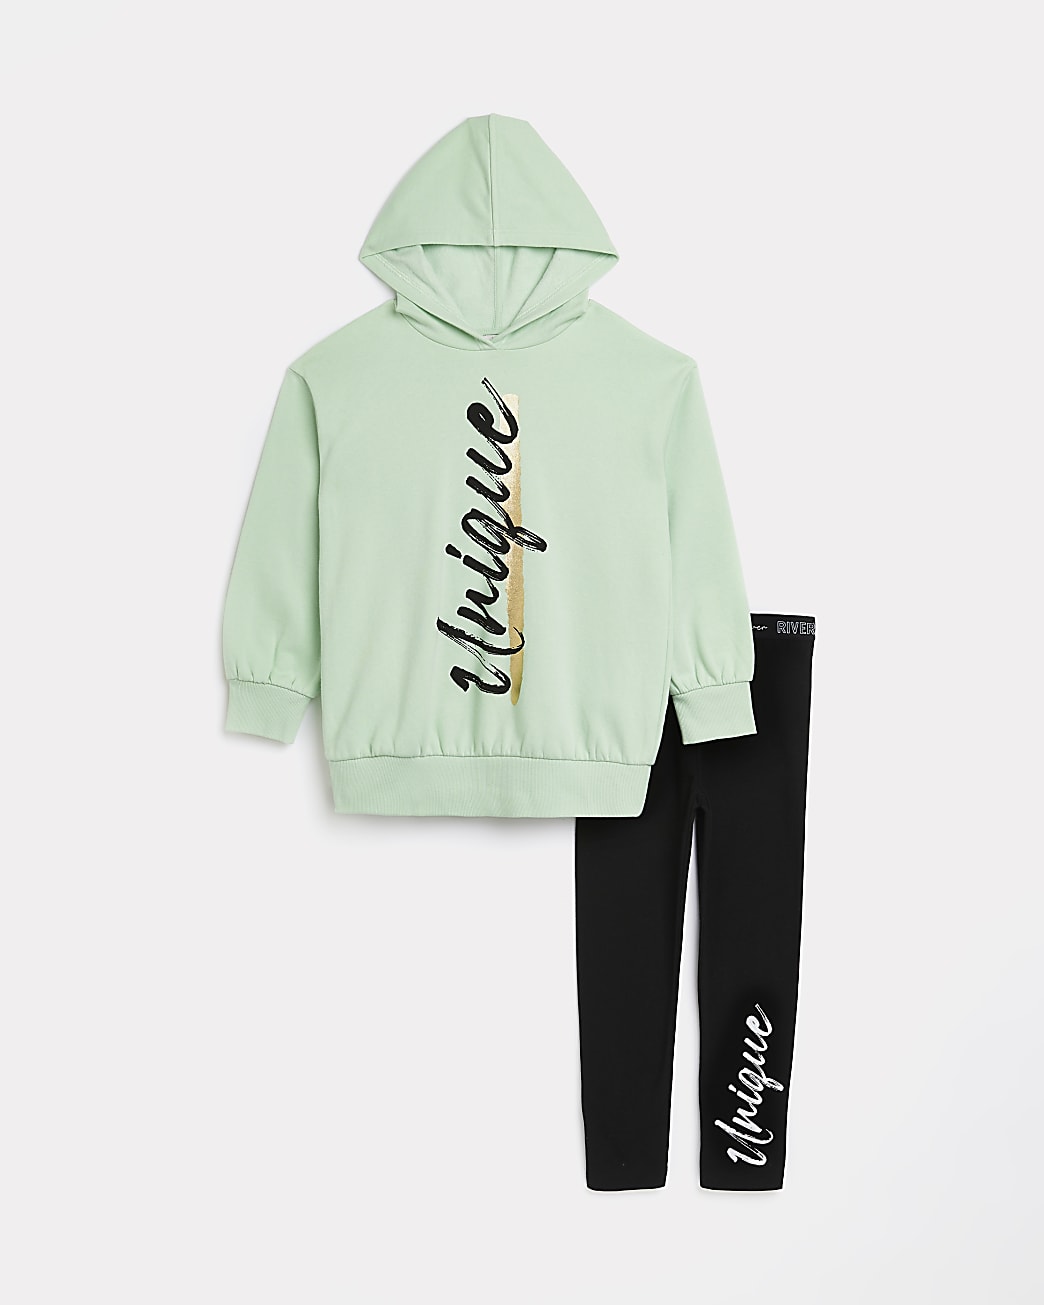 Girls green 'Unique' hoodie outfit